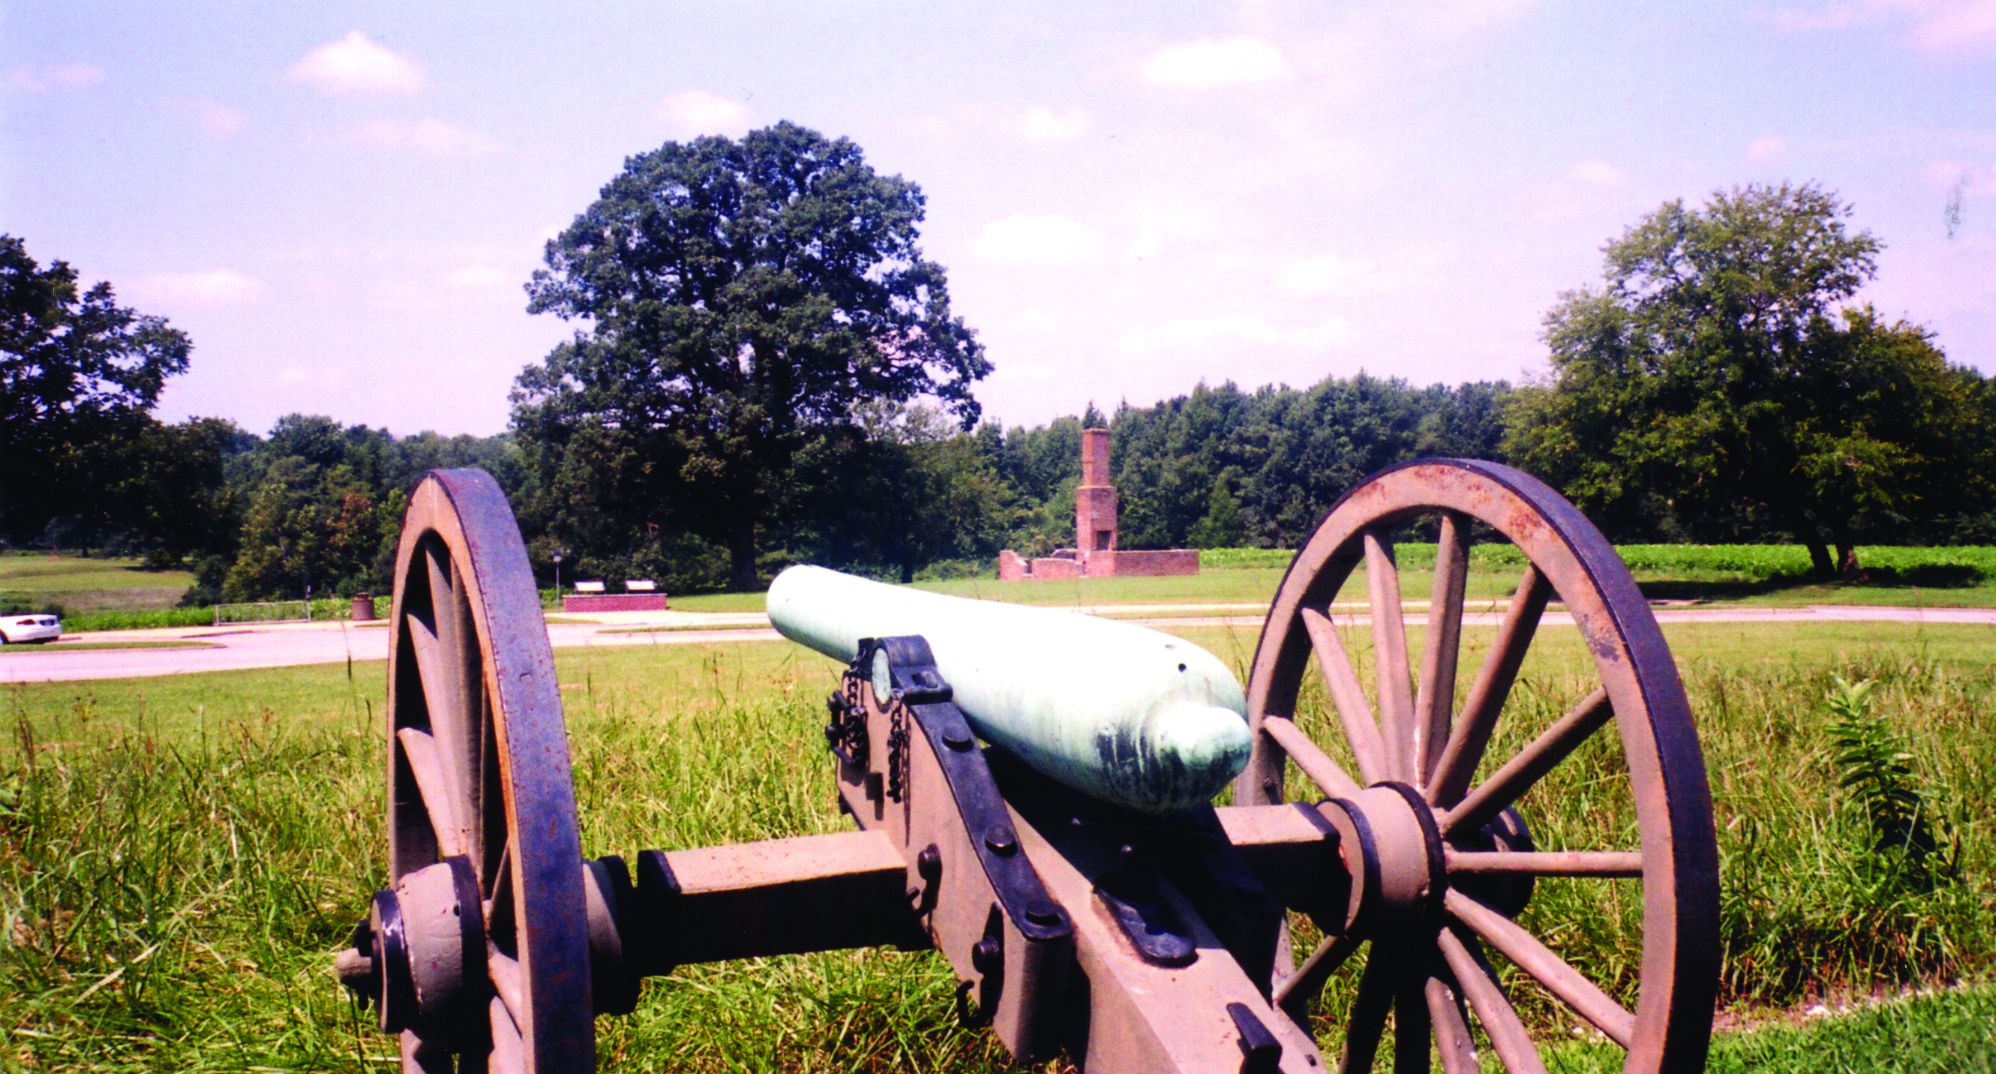 Nearly 200 Union guns at the Taylor Farm were concentrated on the area of the crater’s detonation.